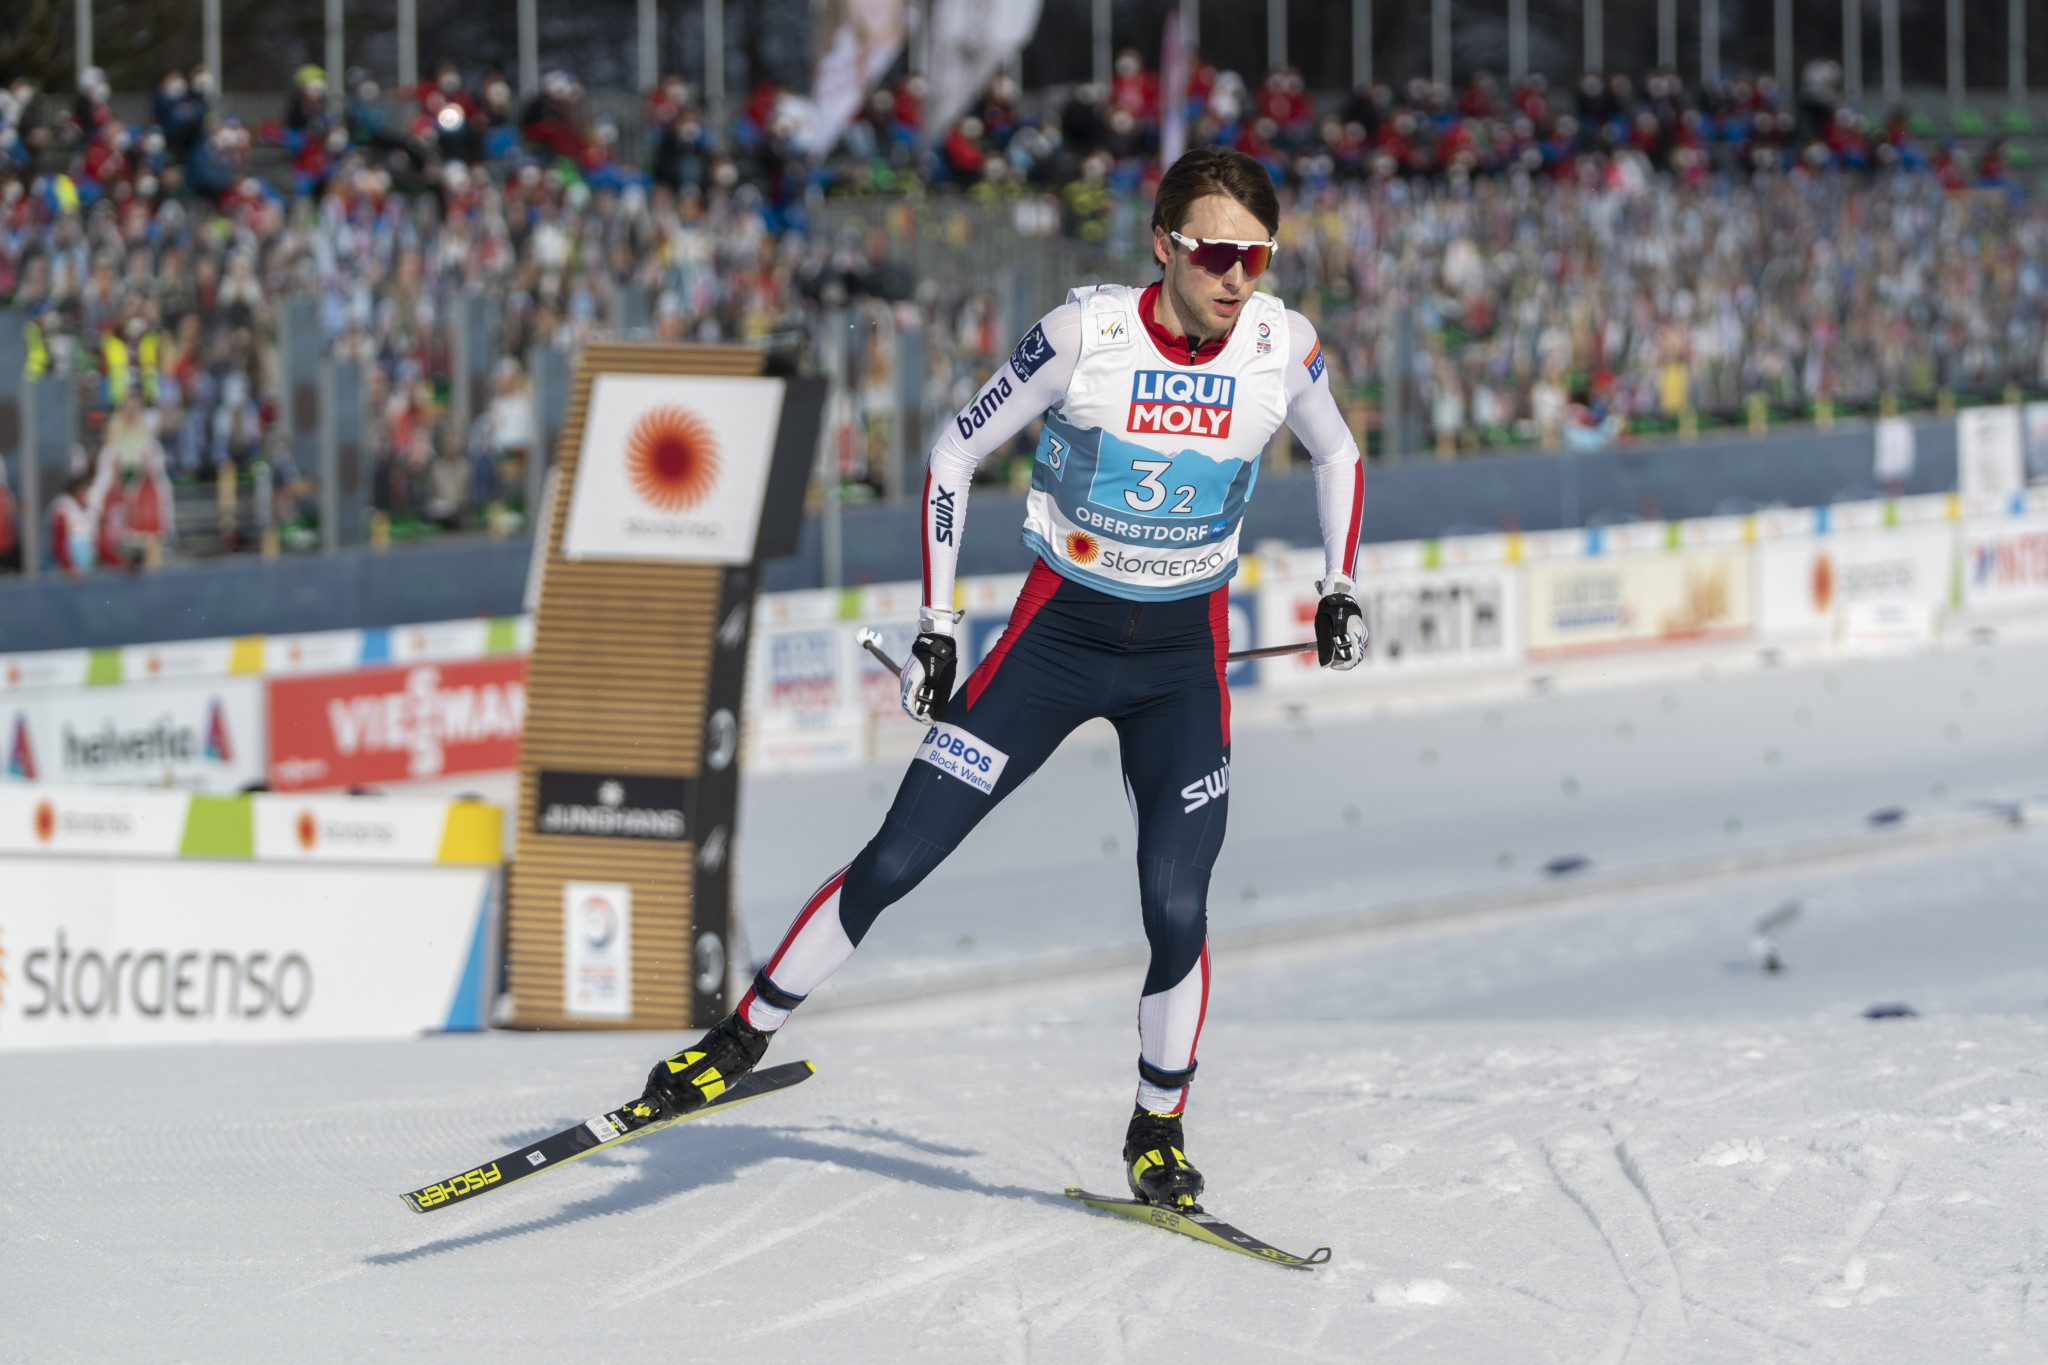 Jarl Magnus Riiber won the first event of the Nordic Combined Triple in Seefeld ©Getty Images